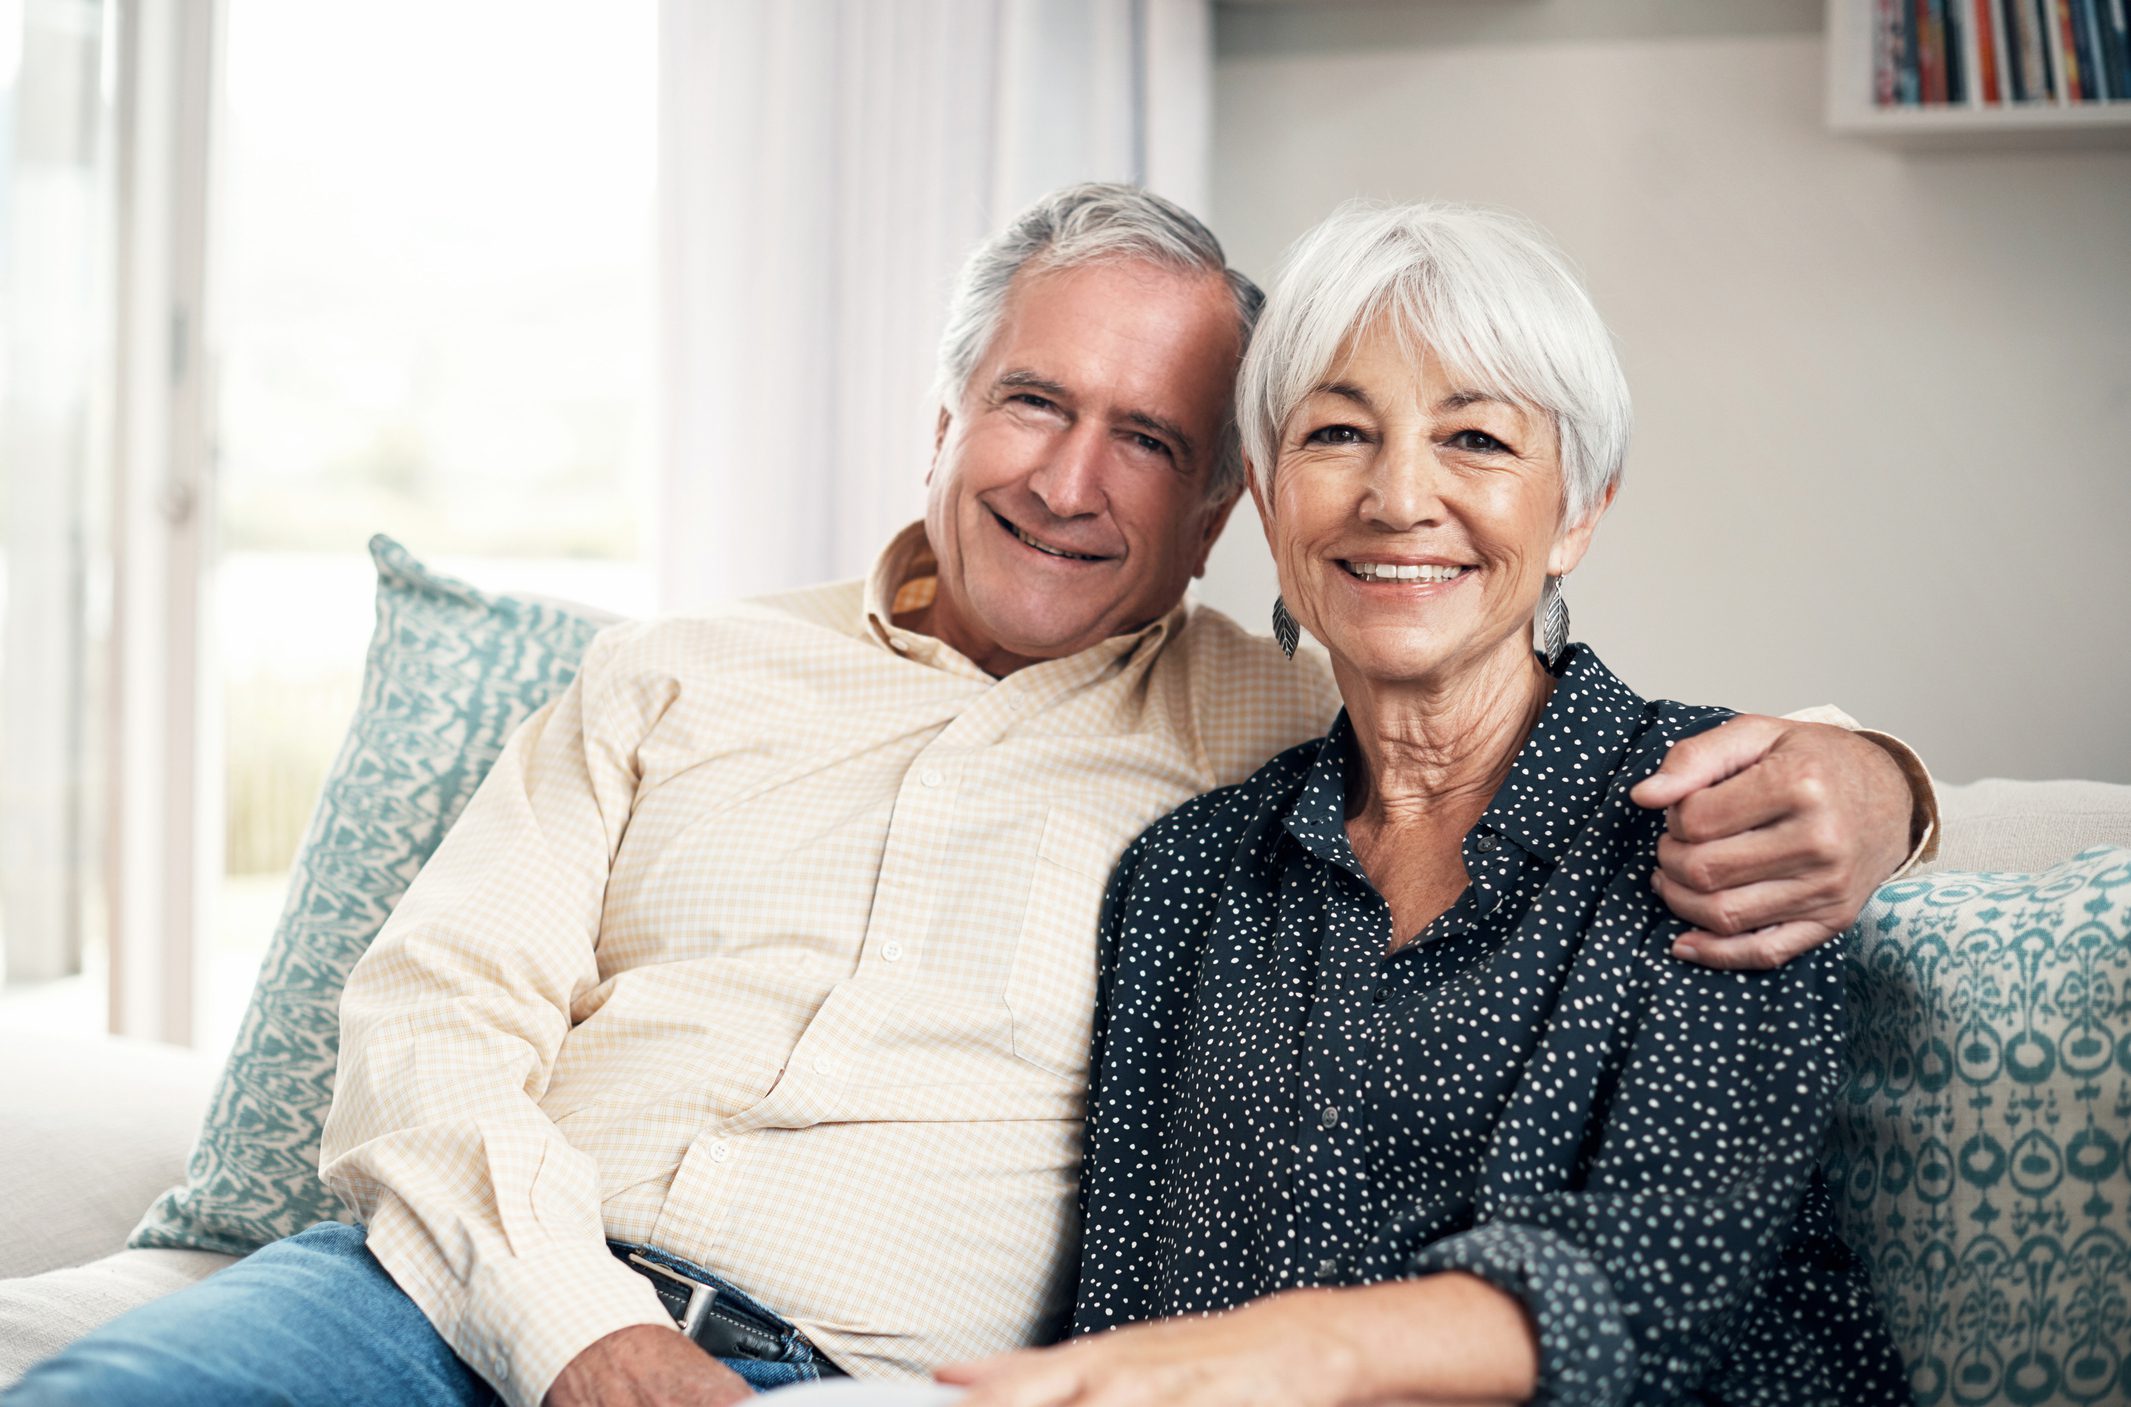 Senior couple at home relaxing together on sofa and smiling